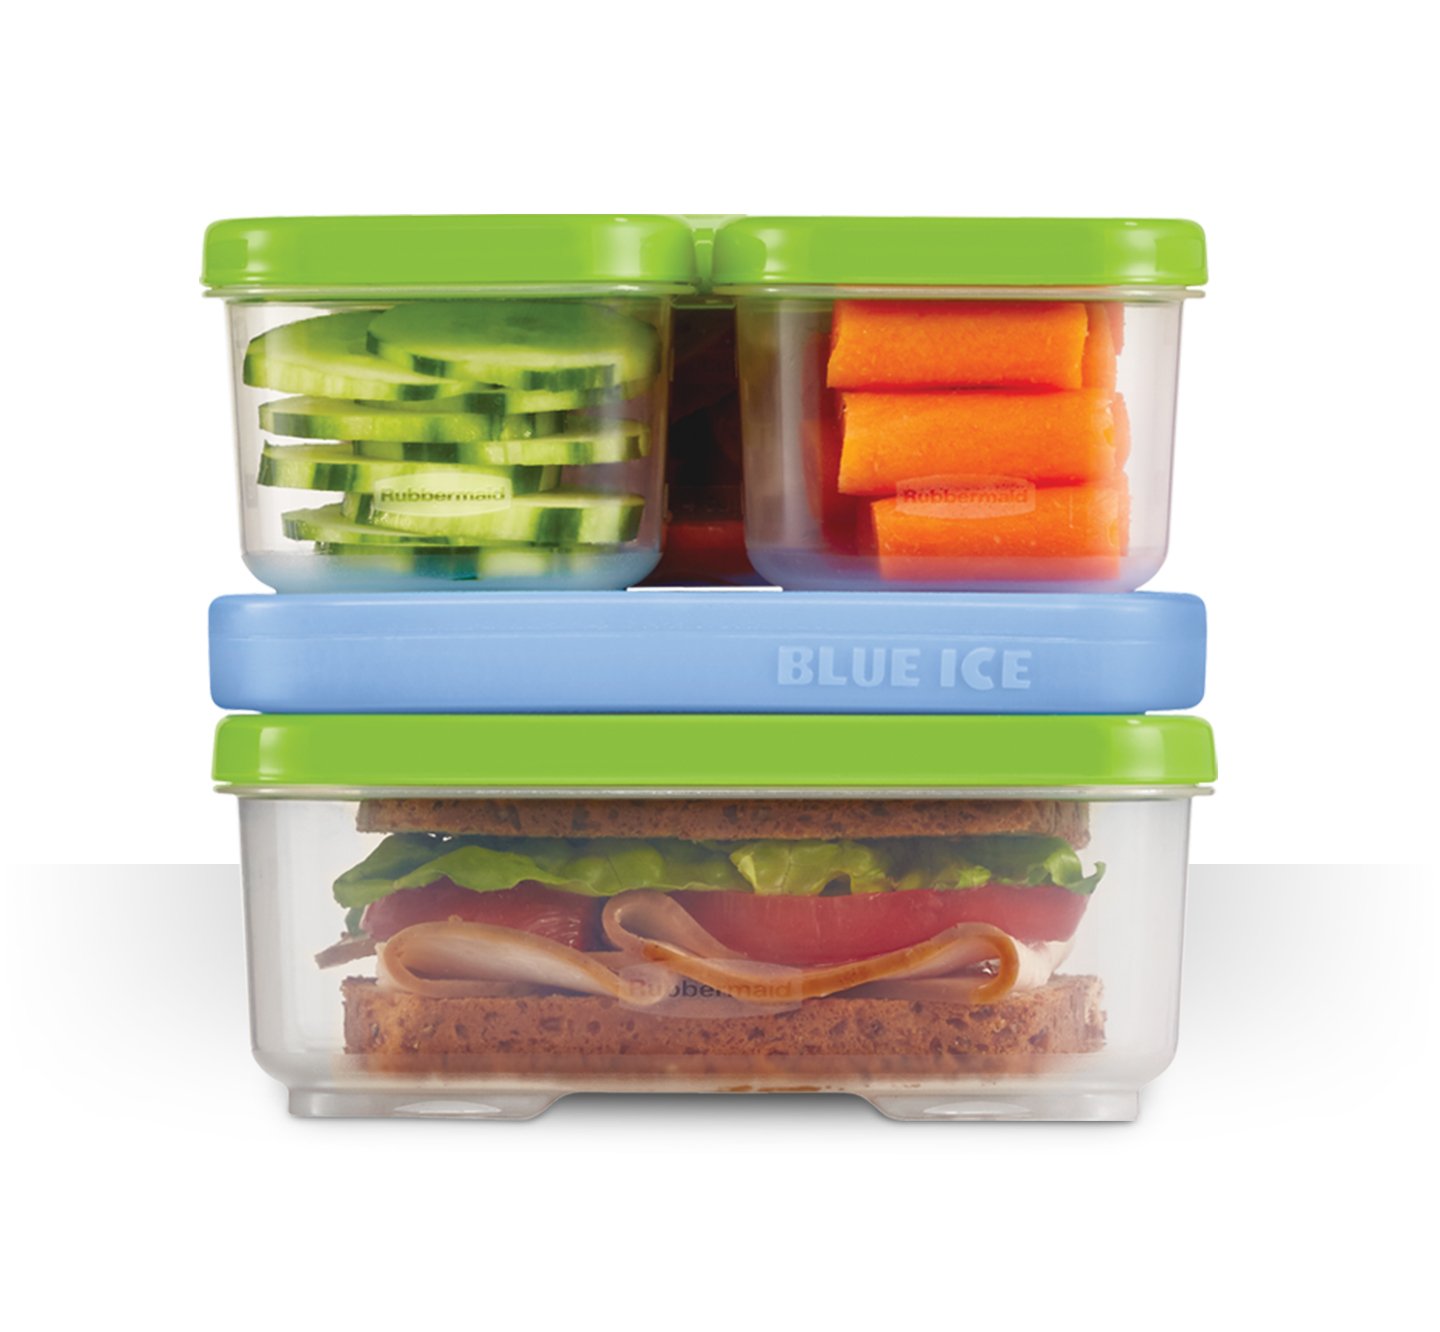 The Best Kids Lunch Gear, According to the Experts